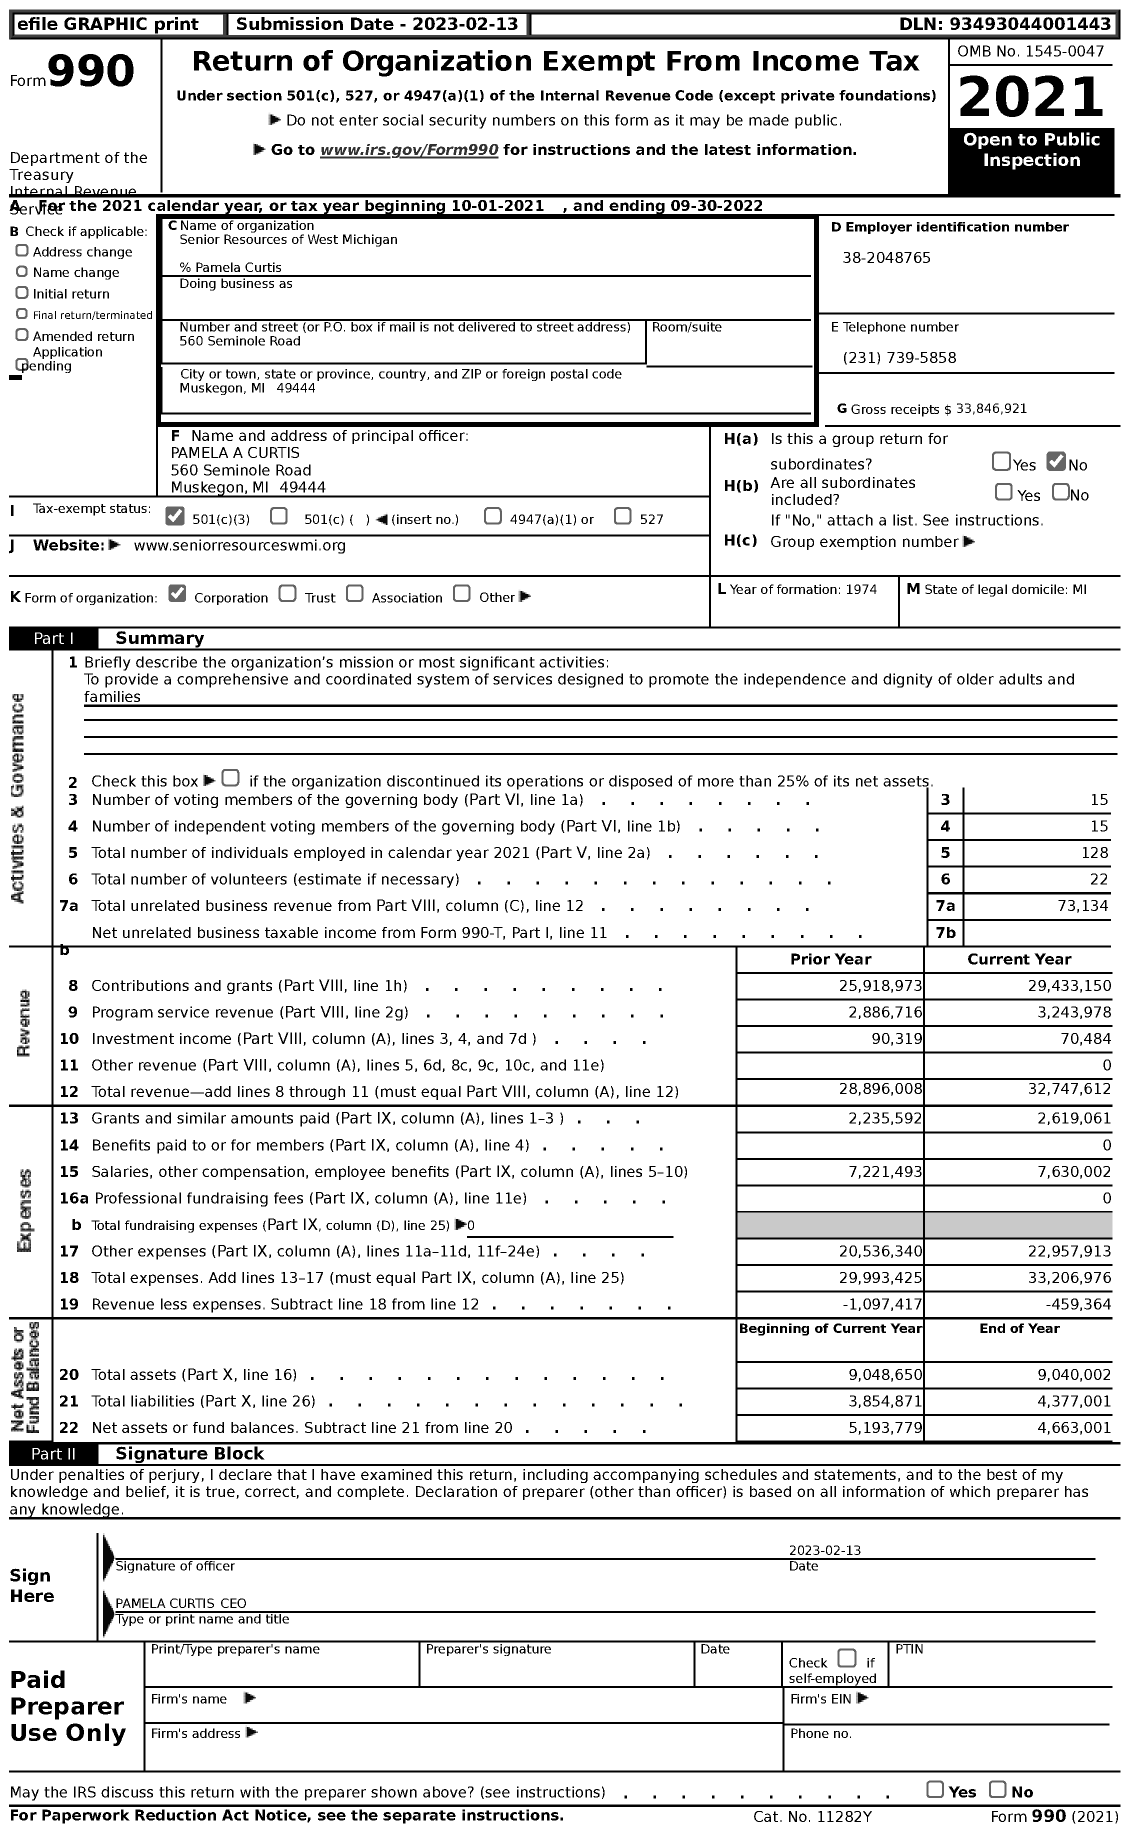 Image of first page of 2021 Form 990 for Senior Resources of West Michigan